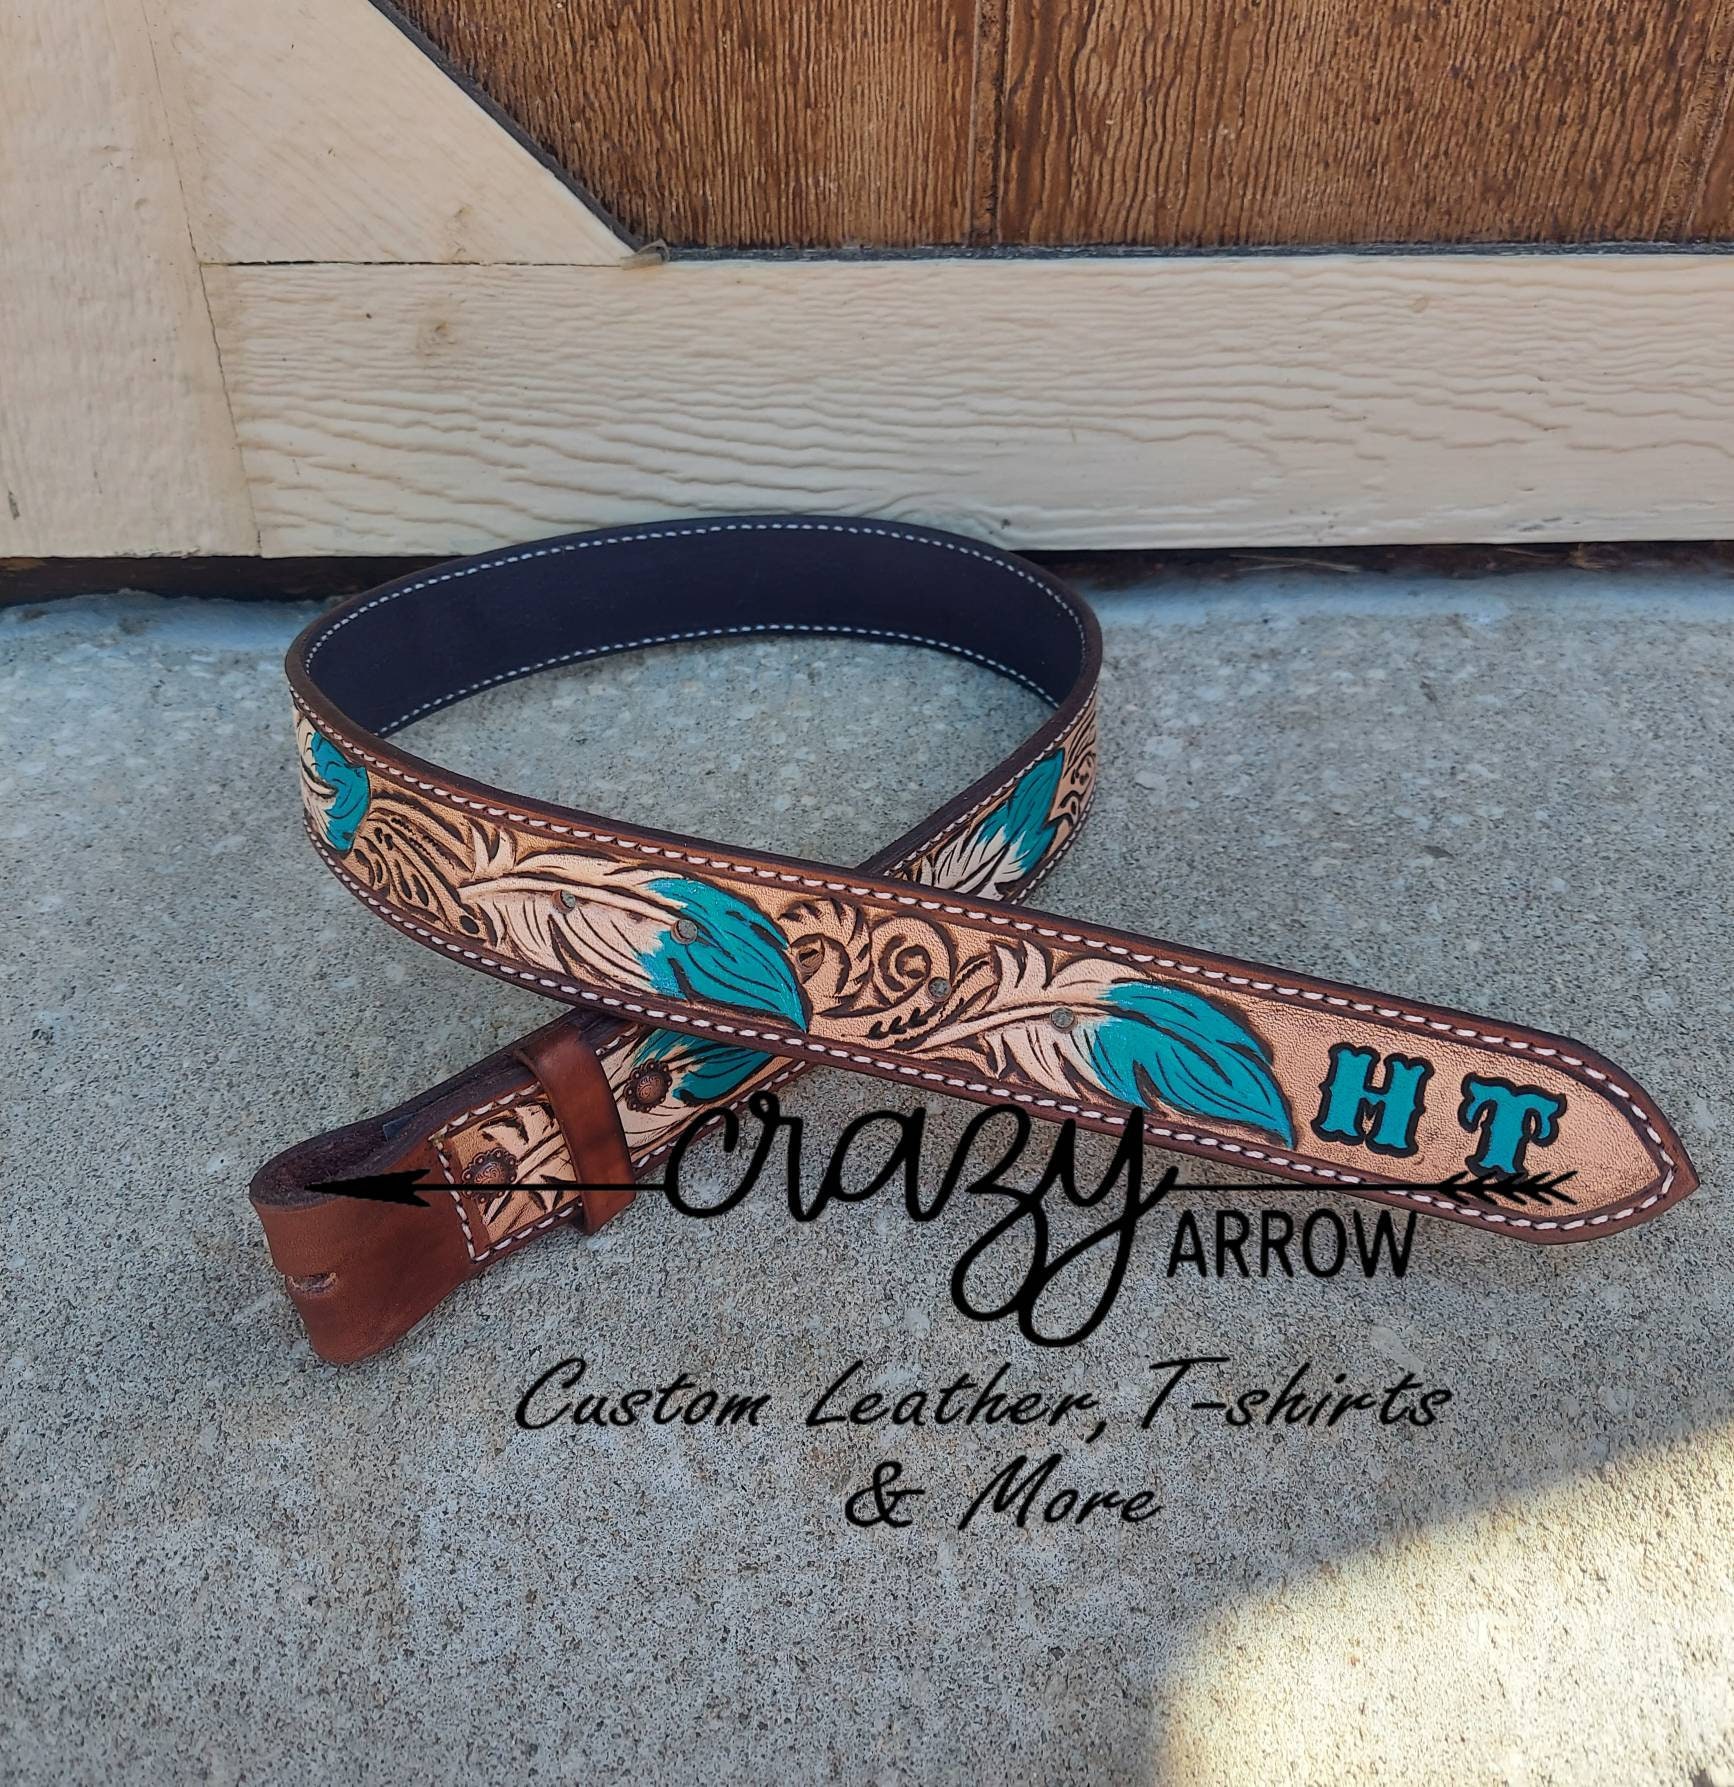 Hand-painted engraved honey western leather belt